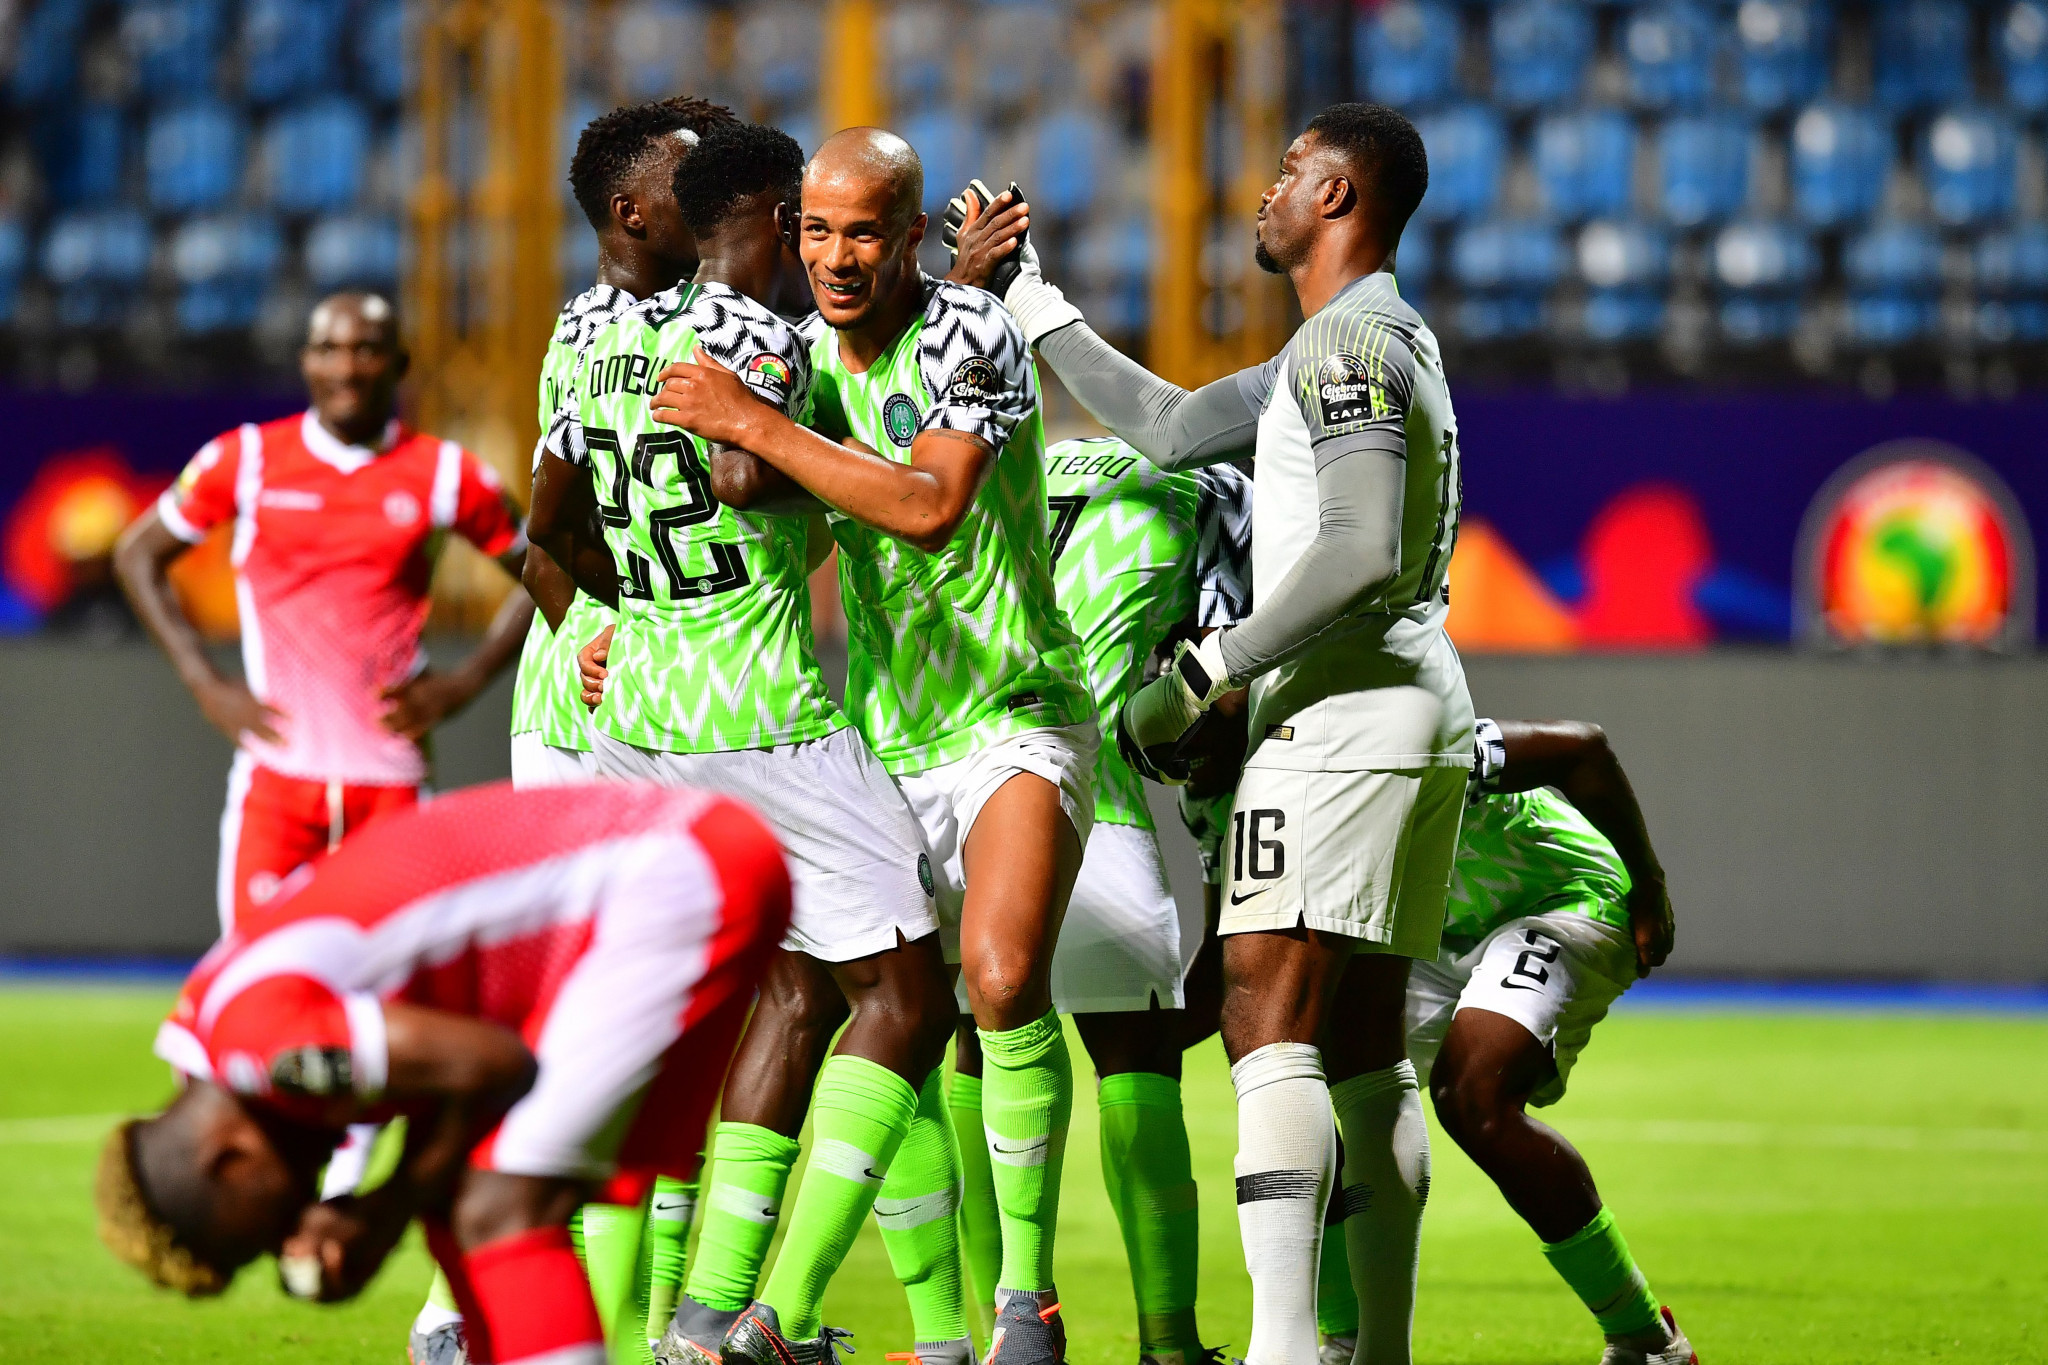 Nigeria beat debutants Burundi 1-0 in their opening Group B clash at the Africa Cup of Nations ©Getty Images